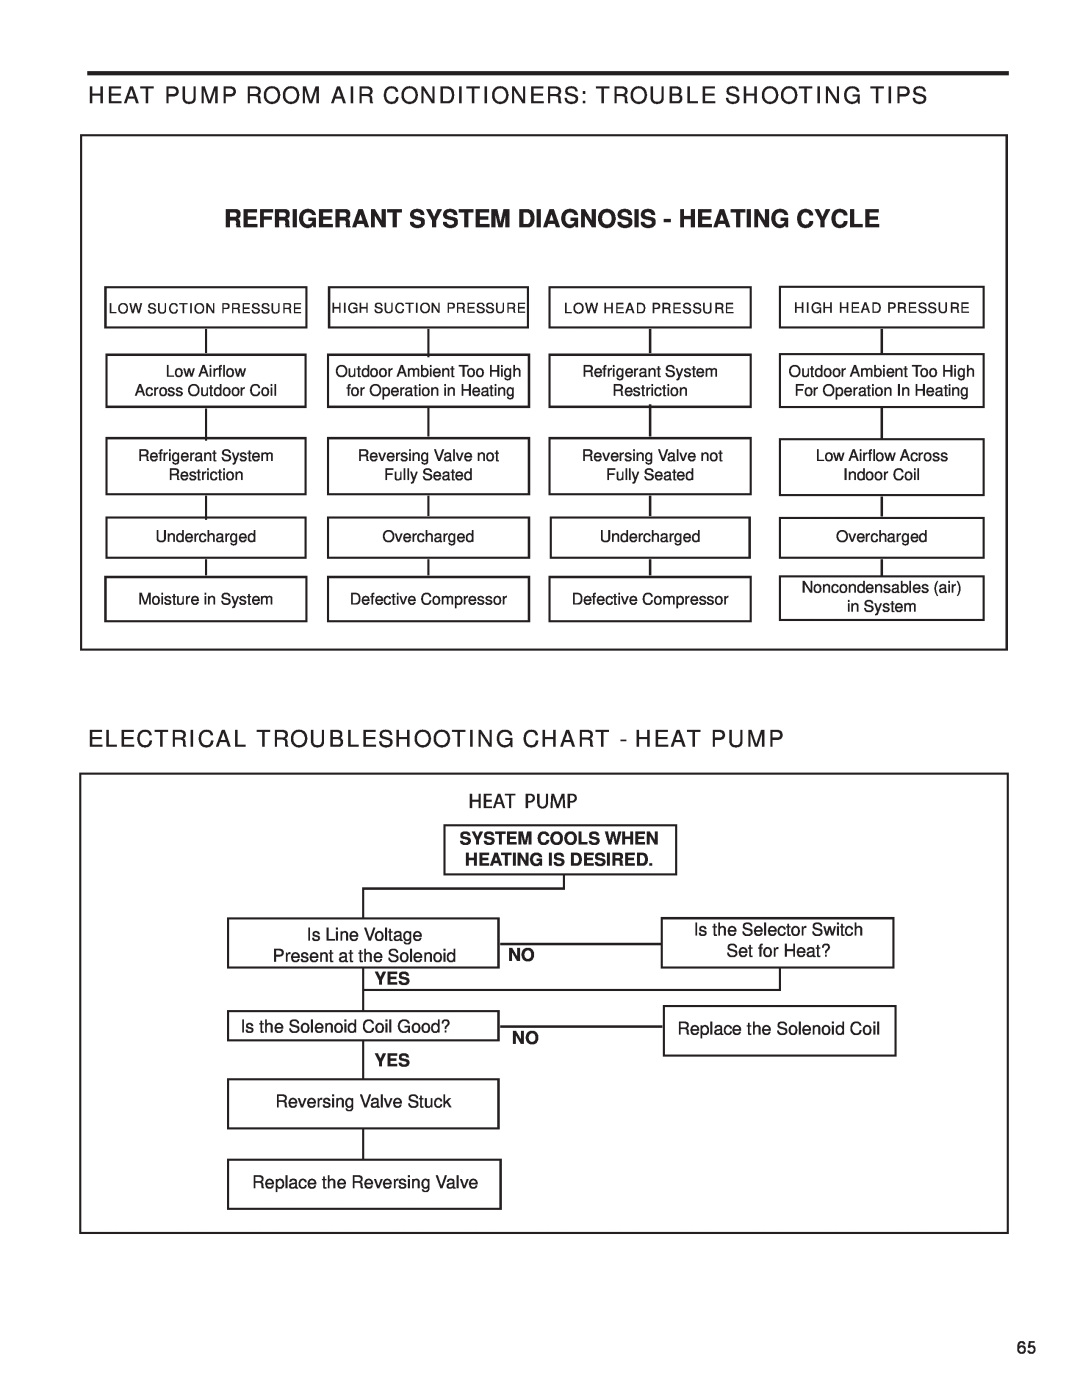 Friedrich R-410A service manual Refrigerant System Diagnosis - Heating Cycle, Electrical Troubleshooting Chart - Heat Pump 